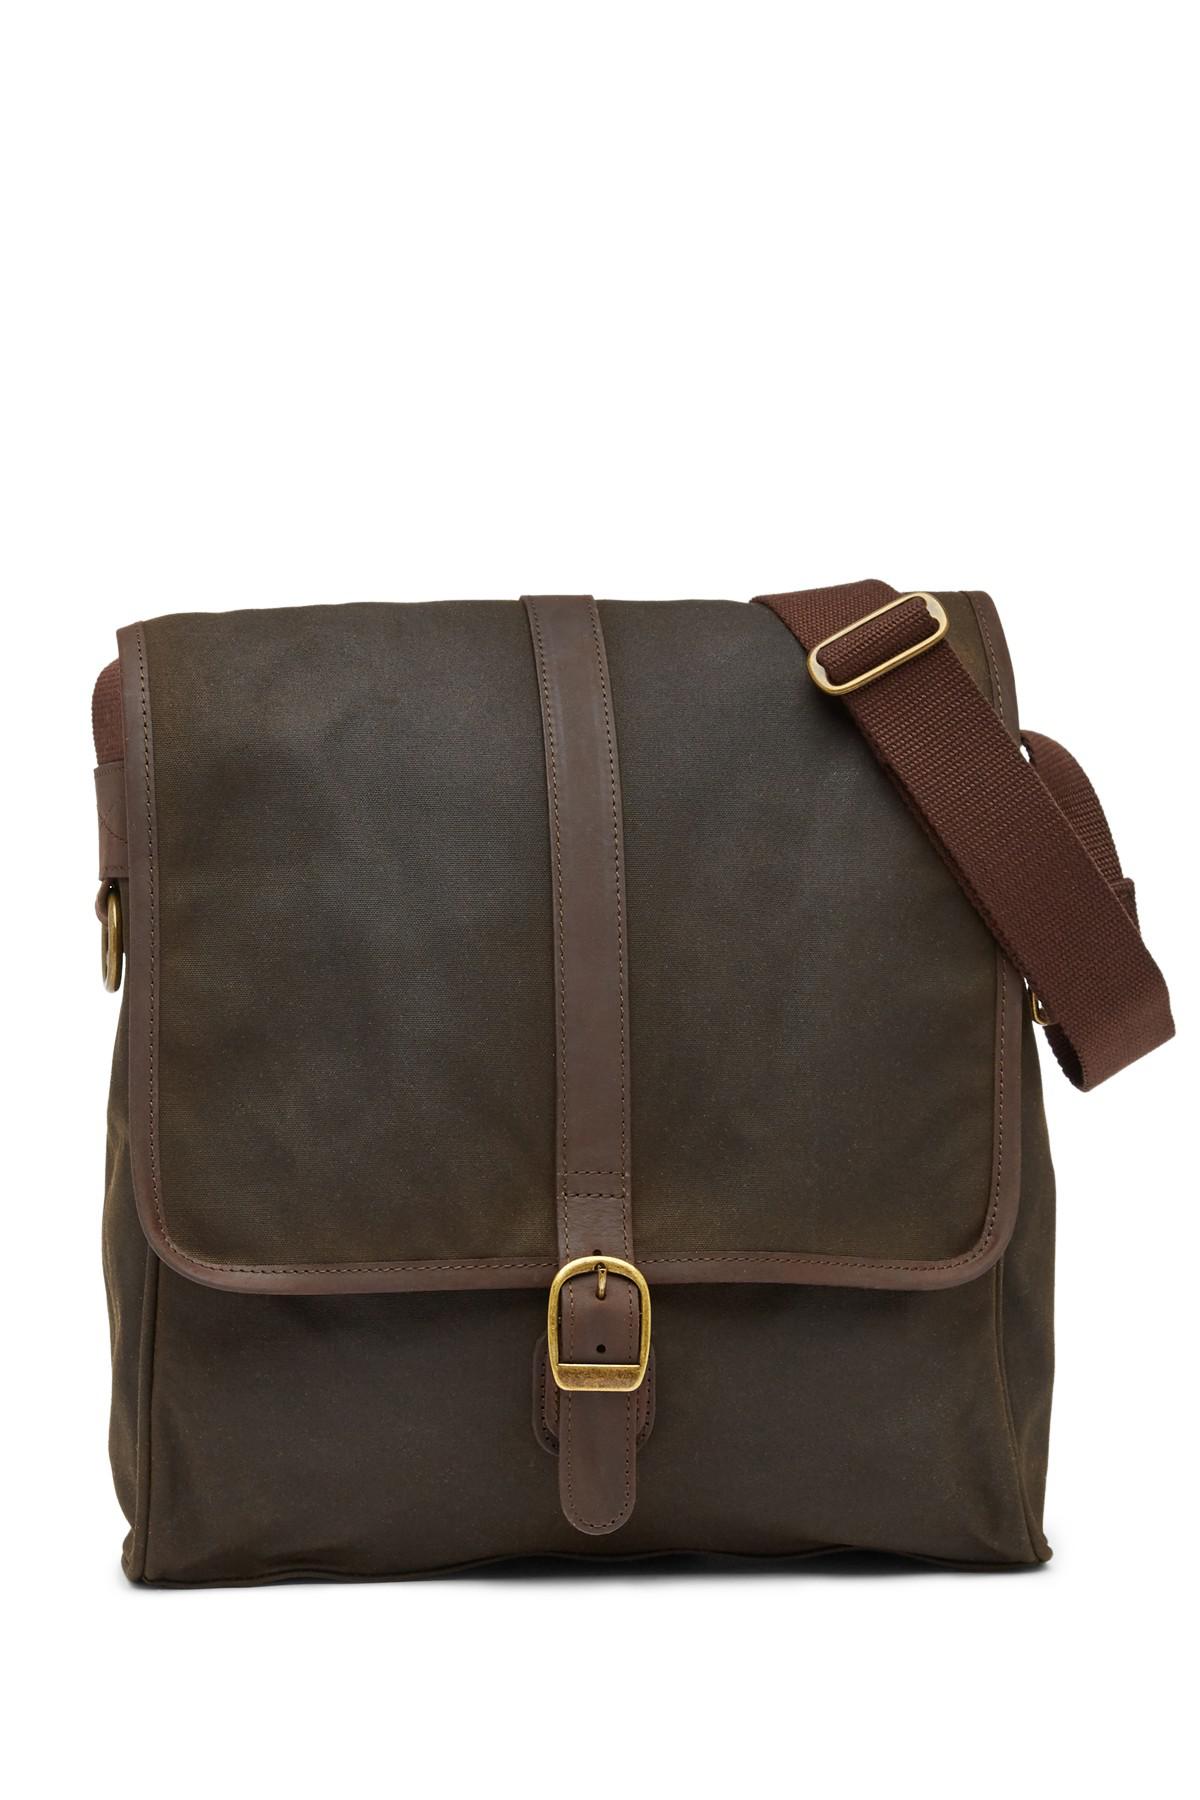 barbour mail bag